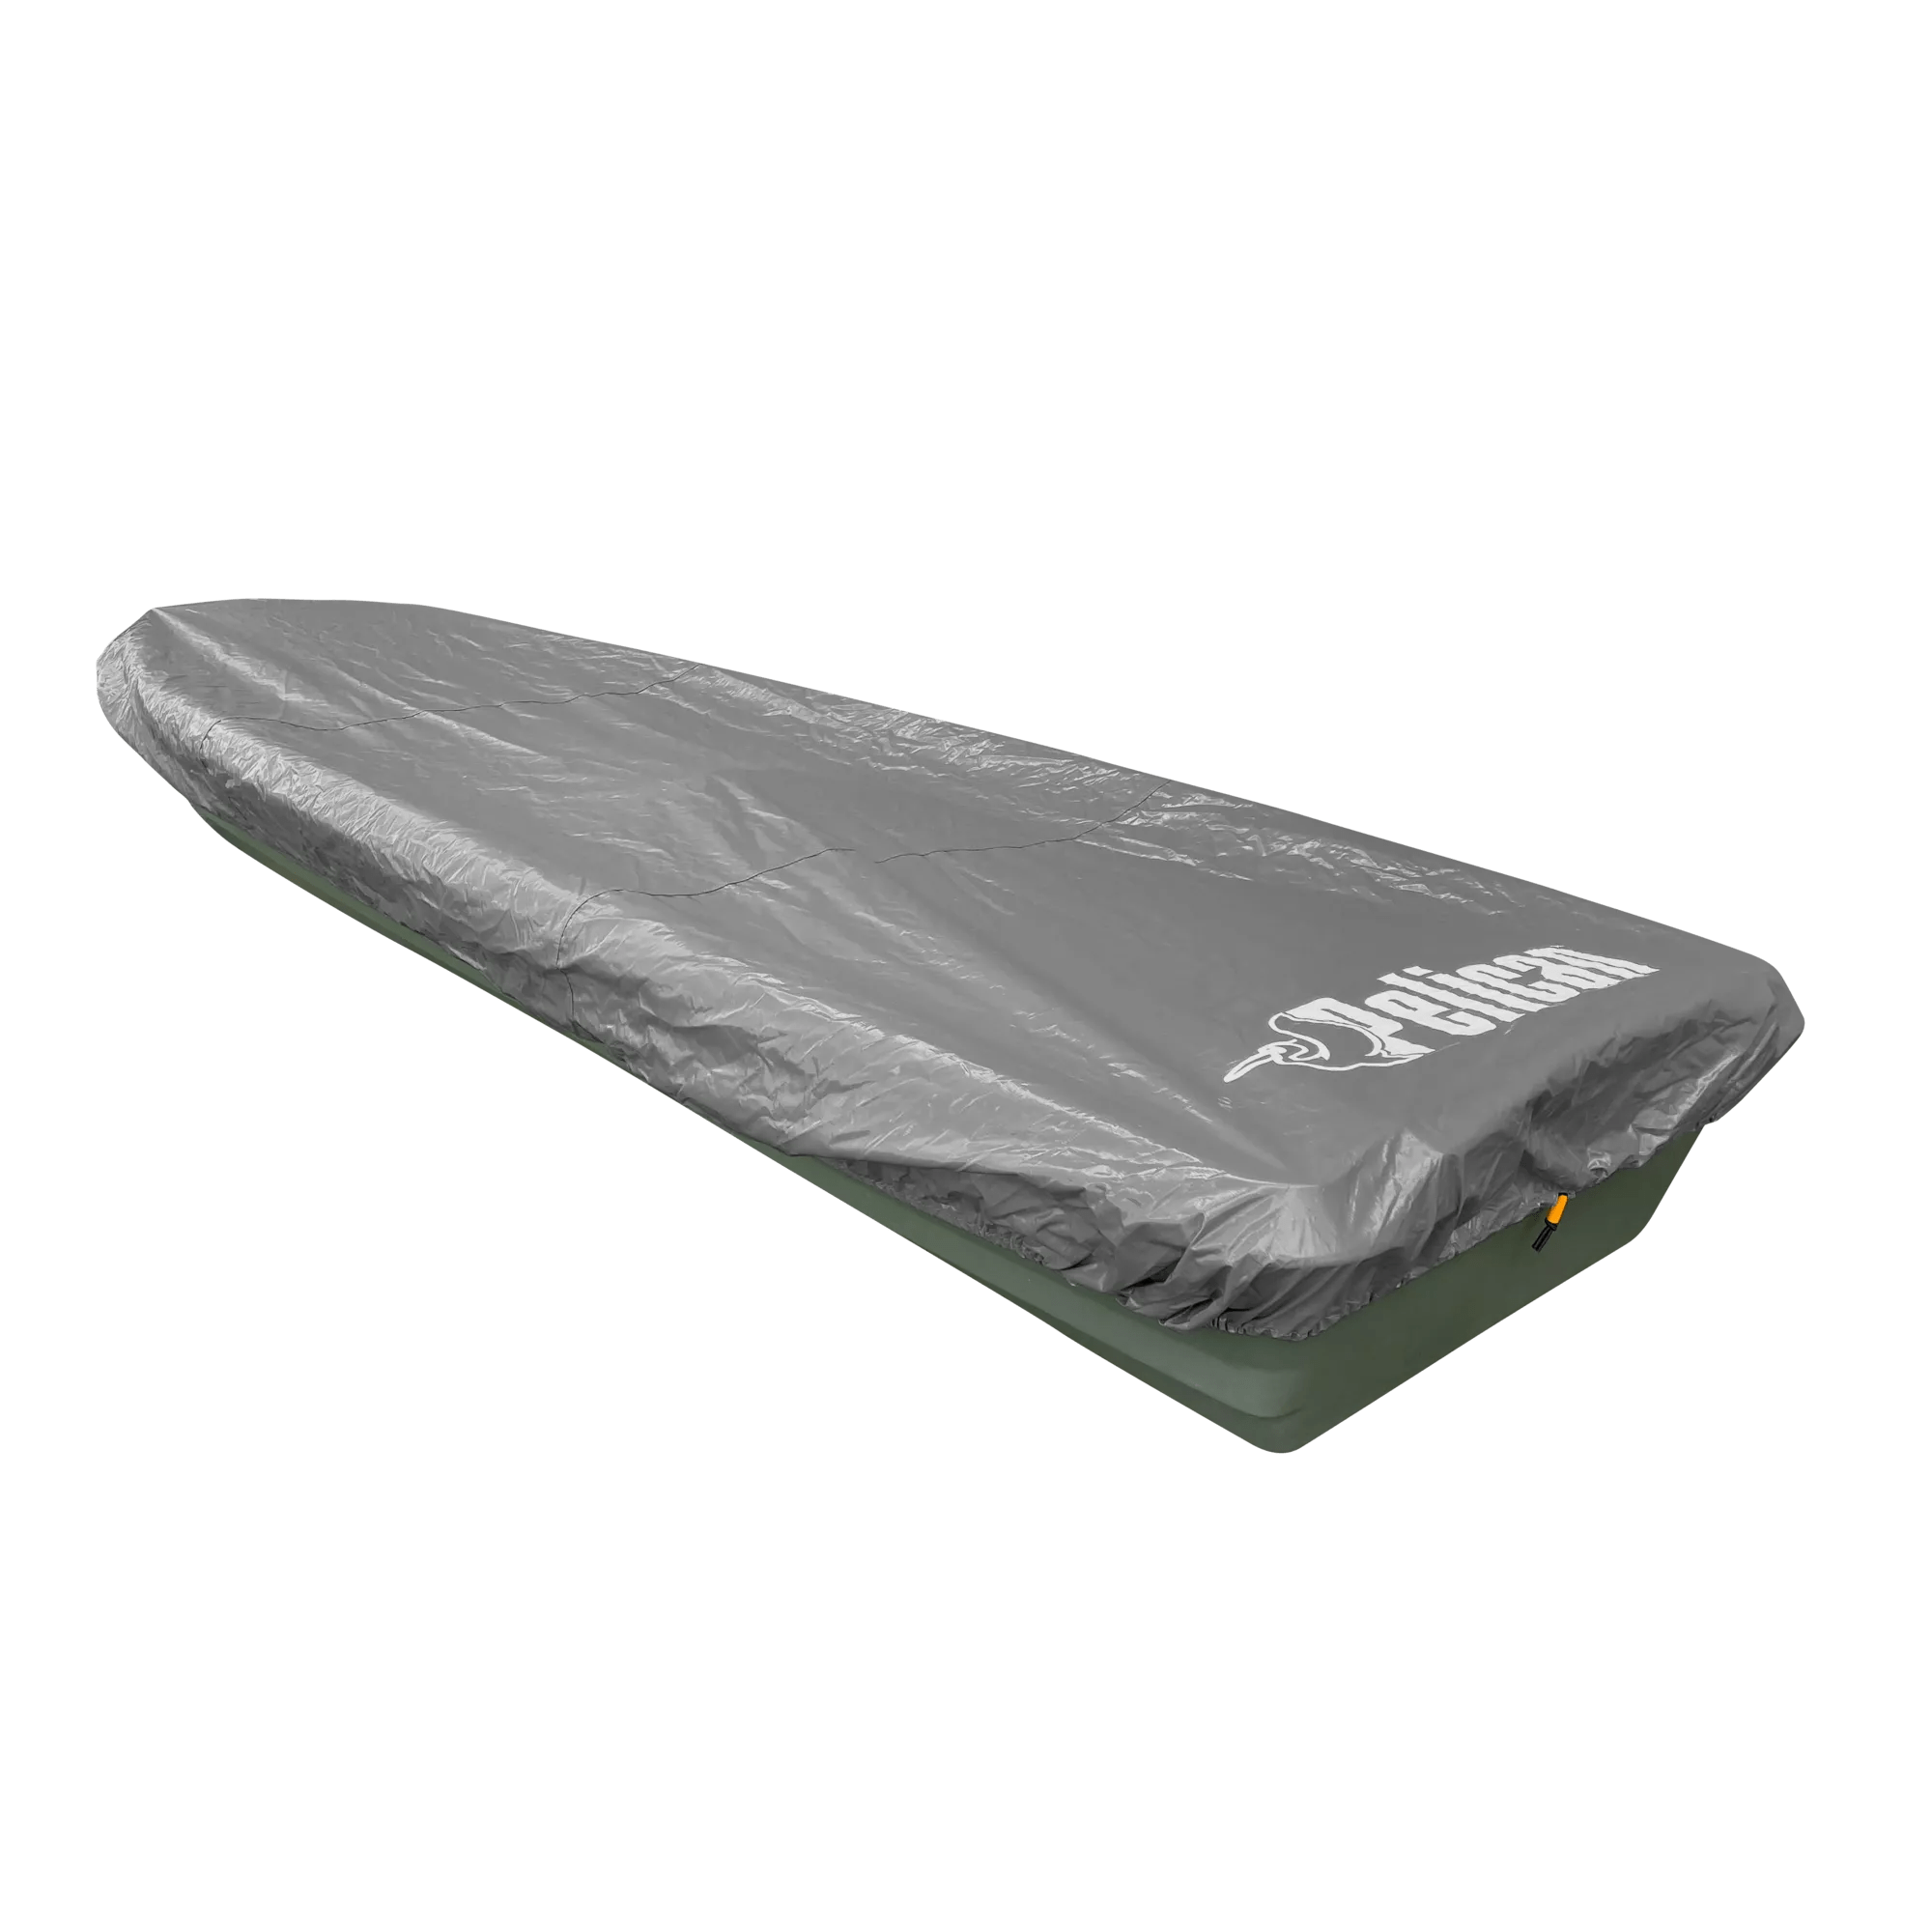 PELICAN - 10-12 ft. Boat Mooring Cover - Grey - PS3058-00 - ISO